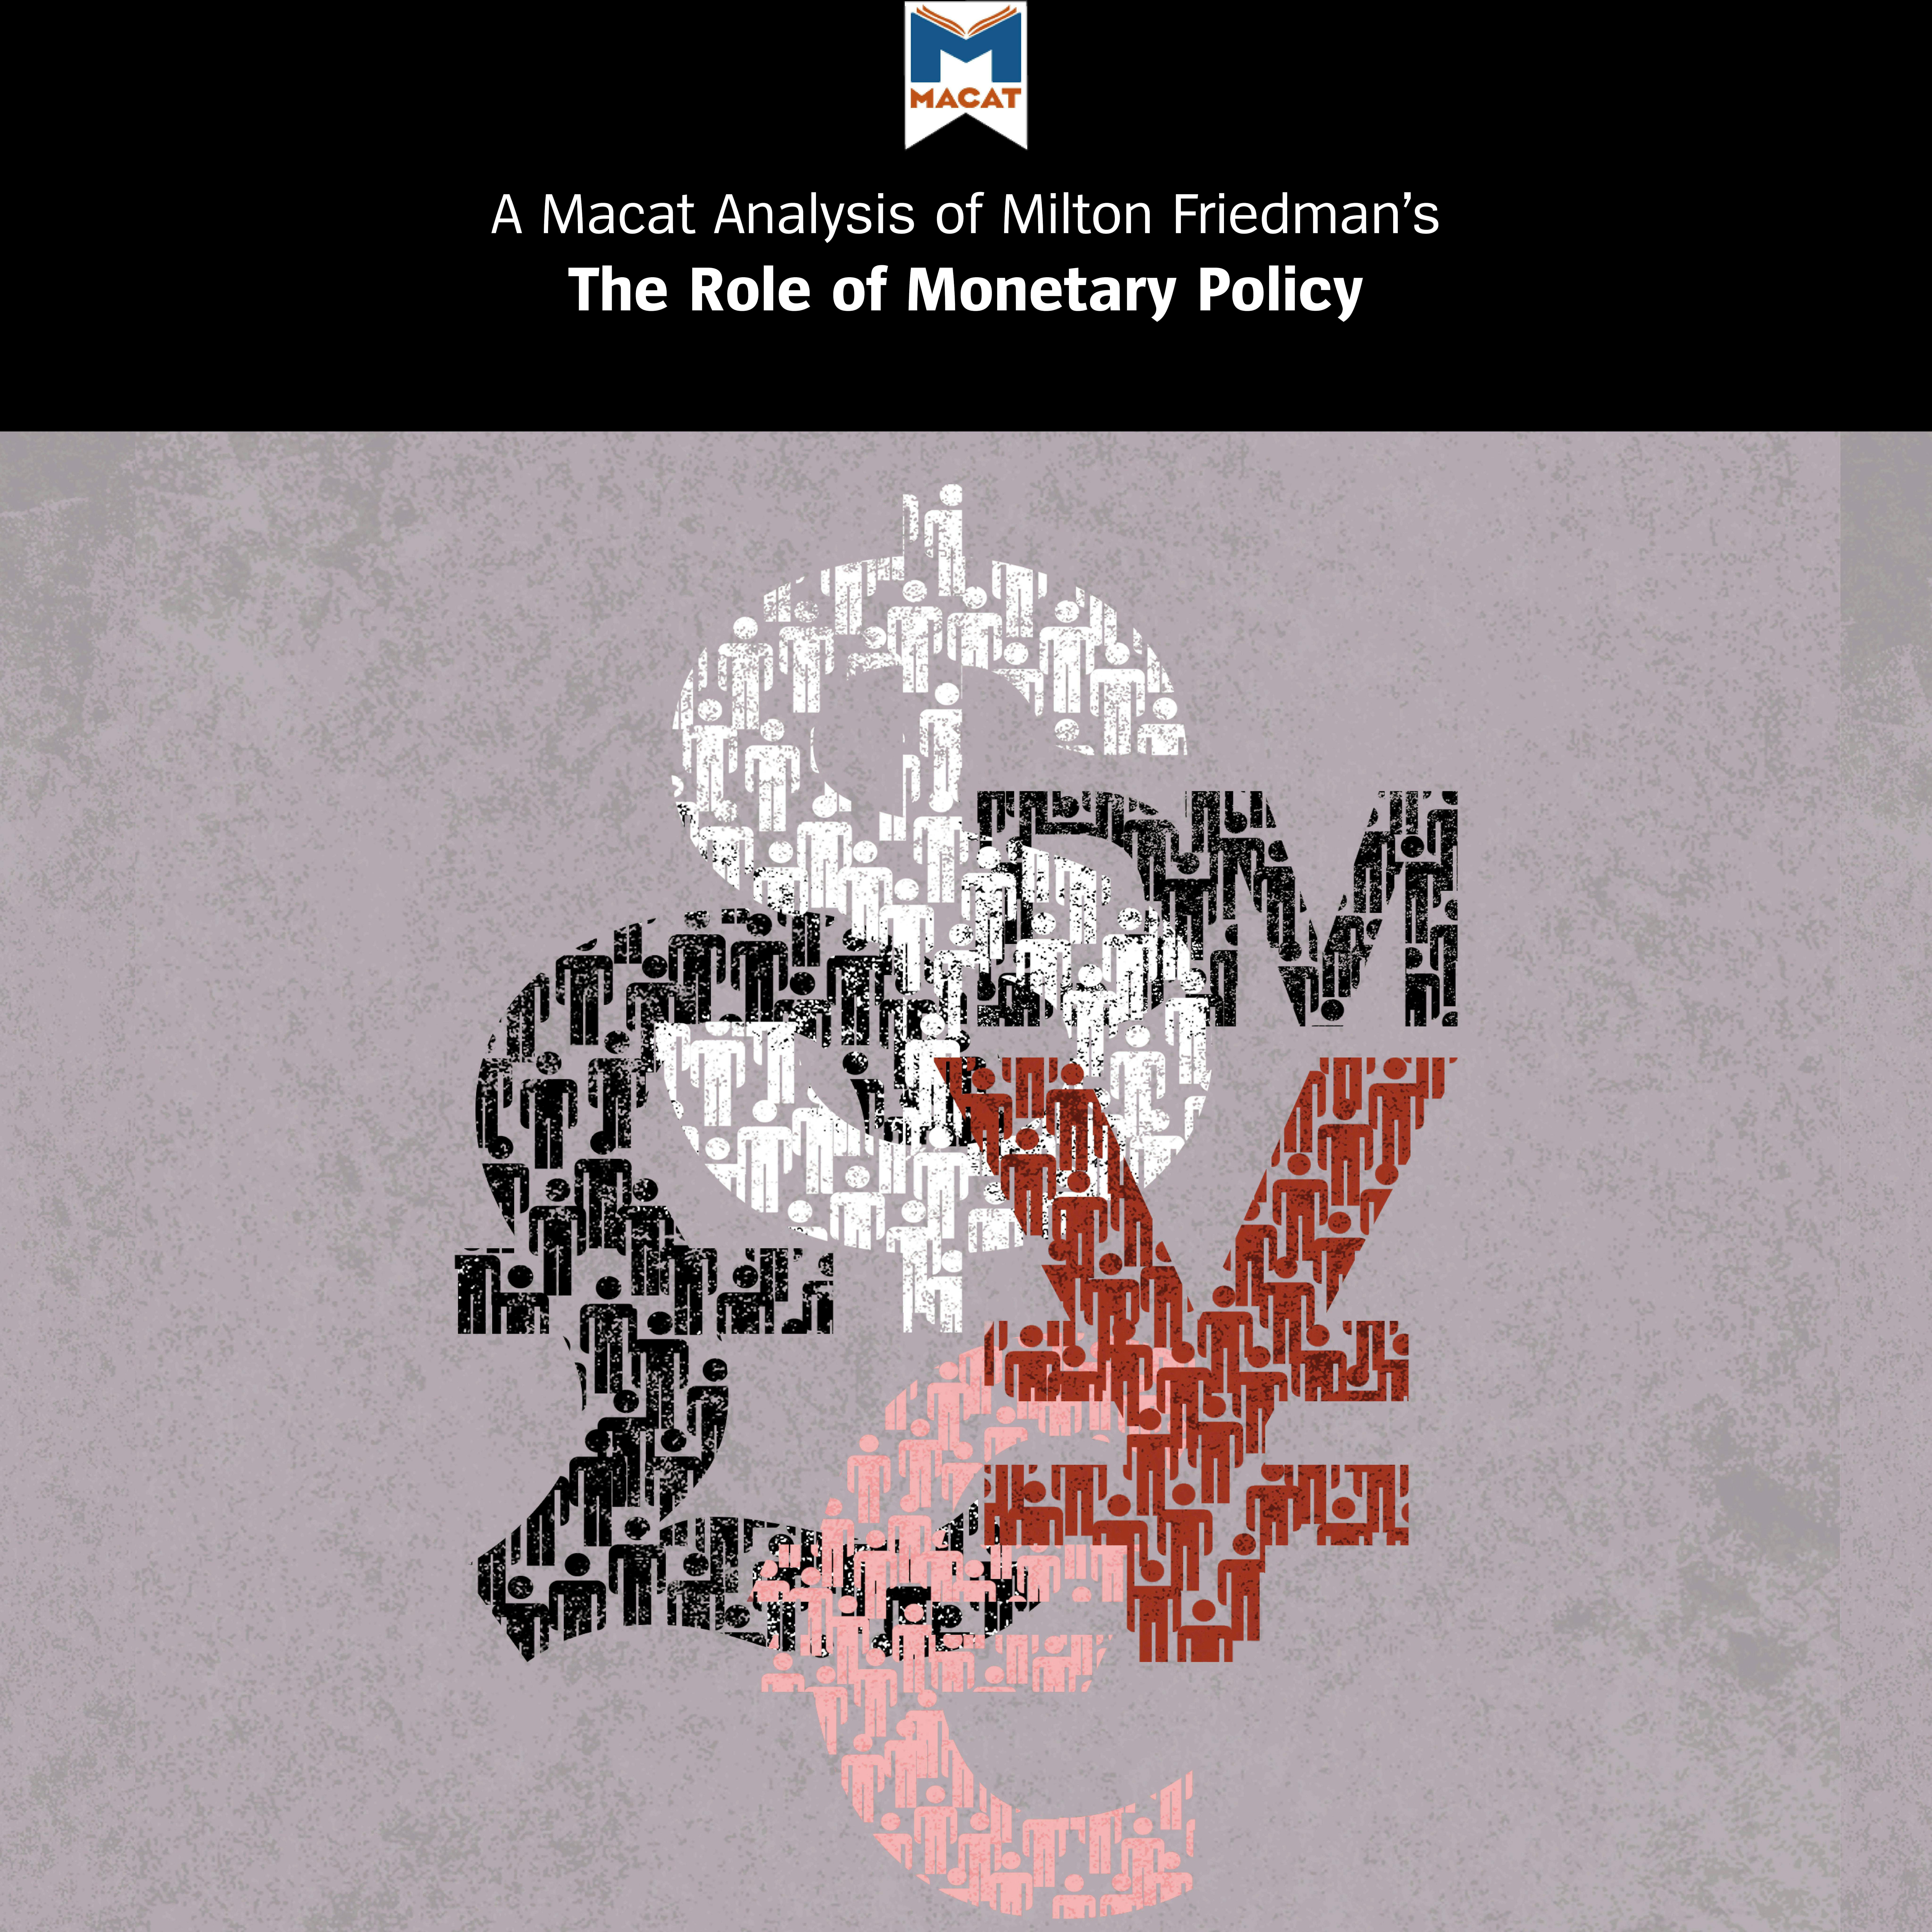 A Macat Analysis of Milton Friedman’s The Role of Monetary Policy - John Collins, Nick Broten